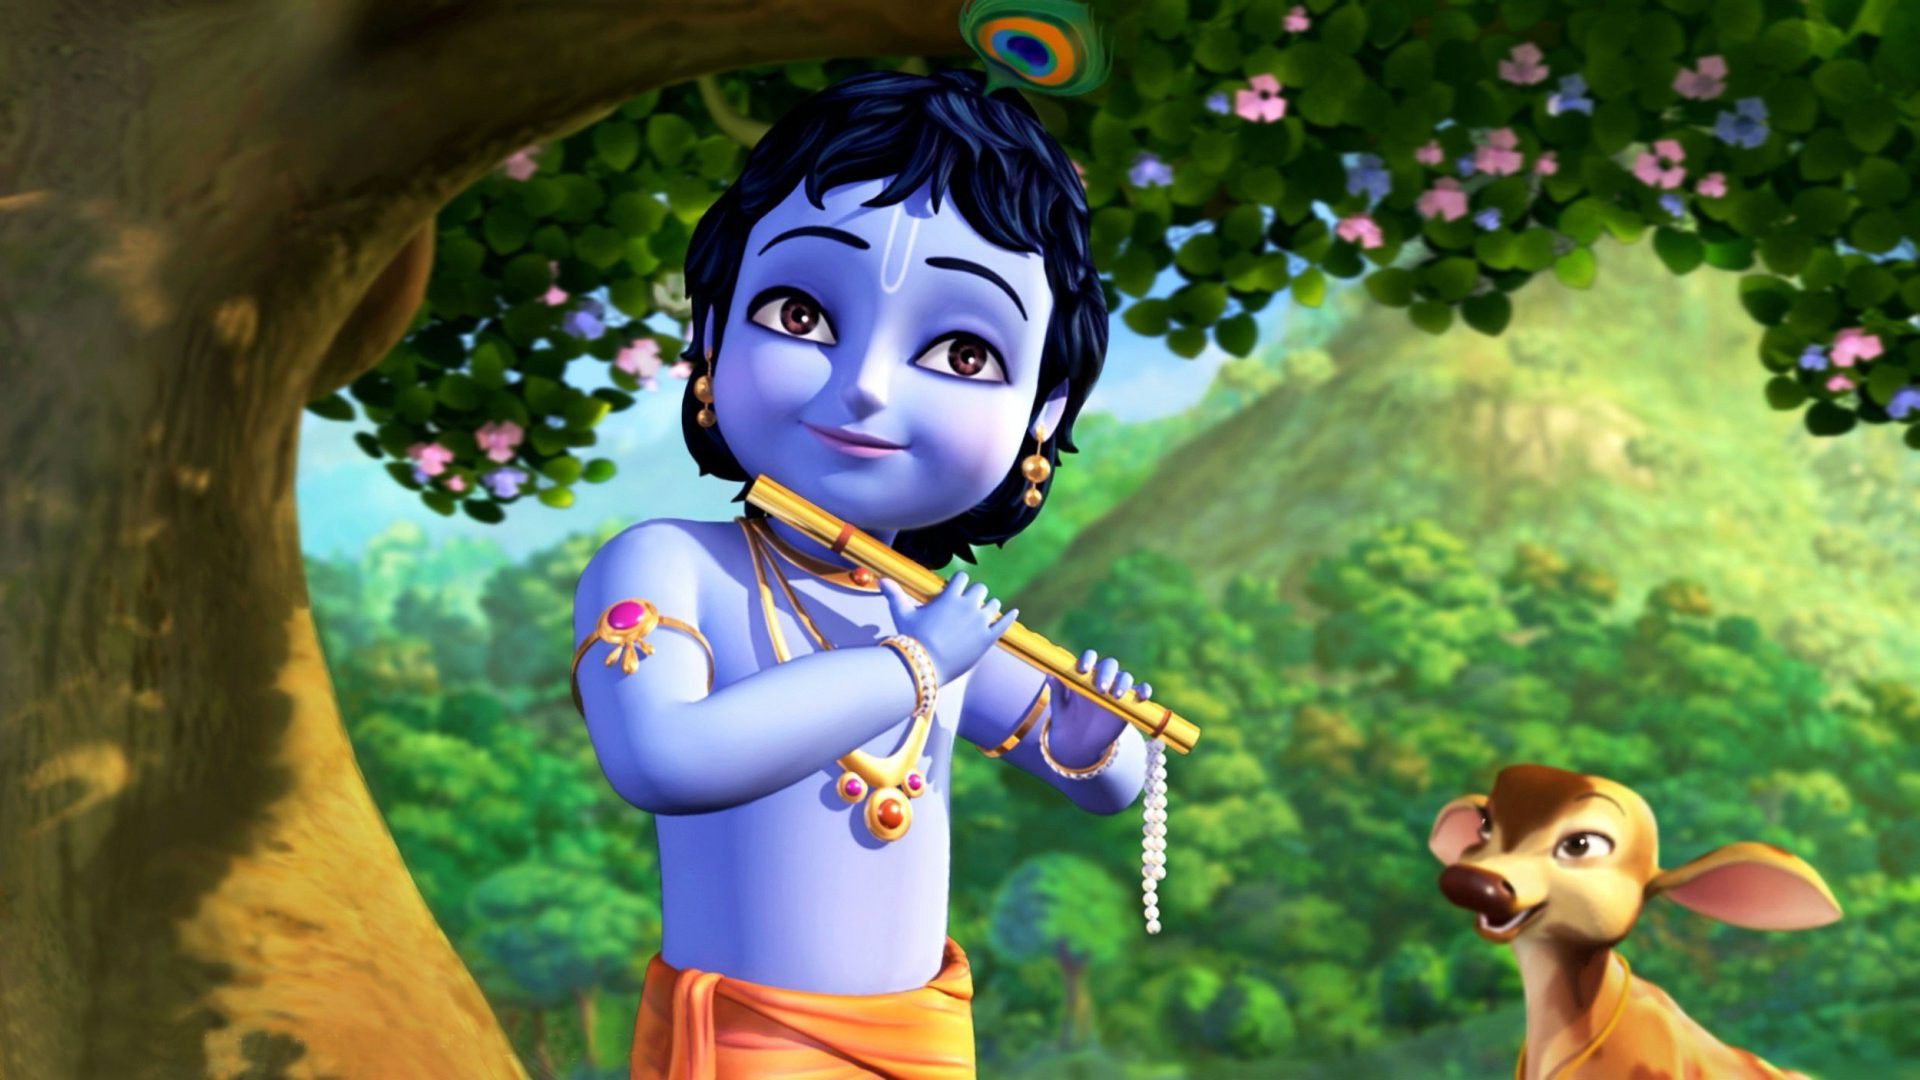 99+ Latest Krishna Images For DP [Best Collection] - GyanVaan